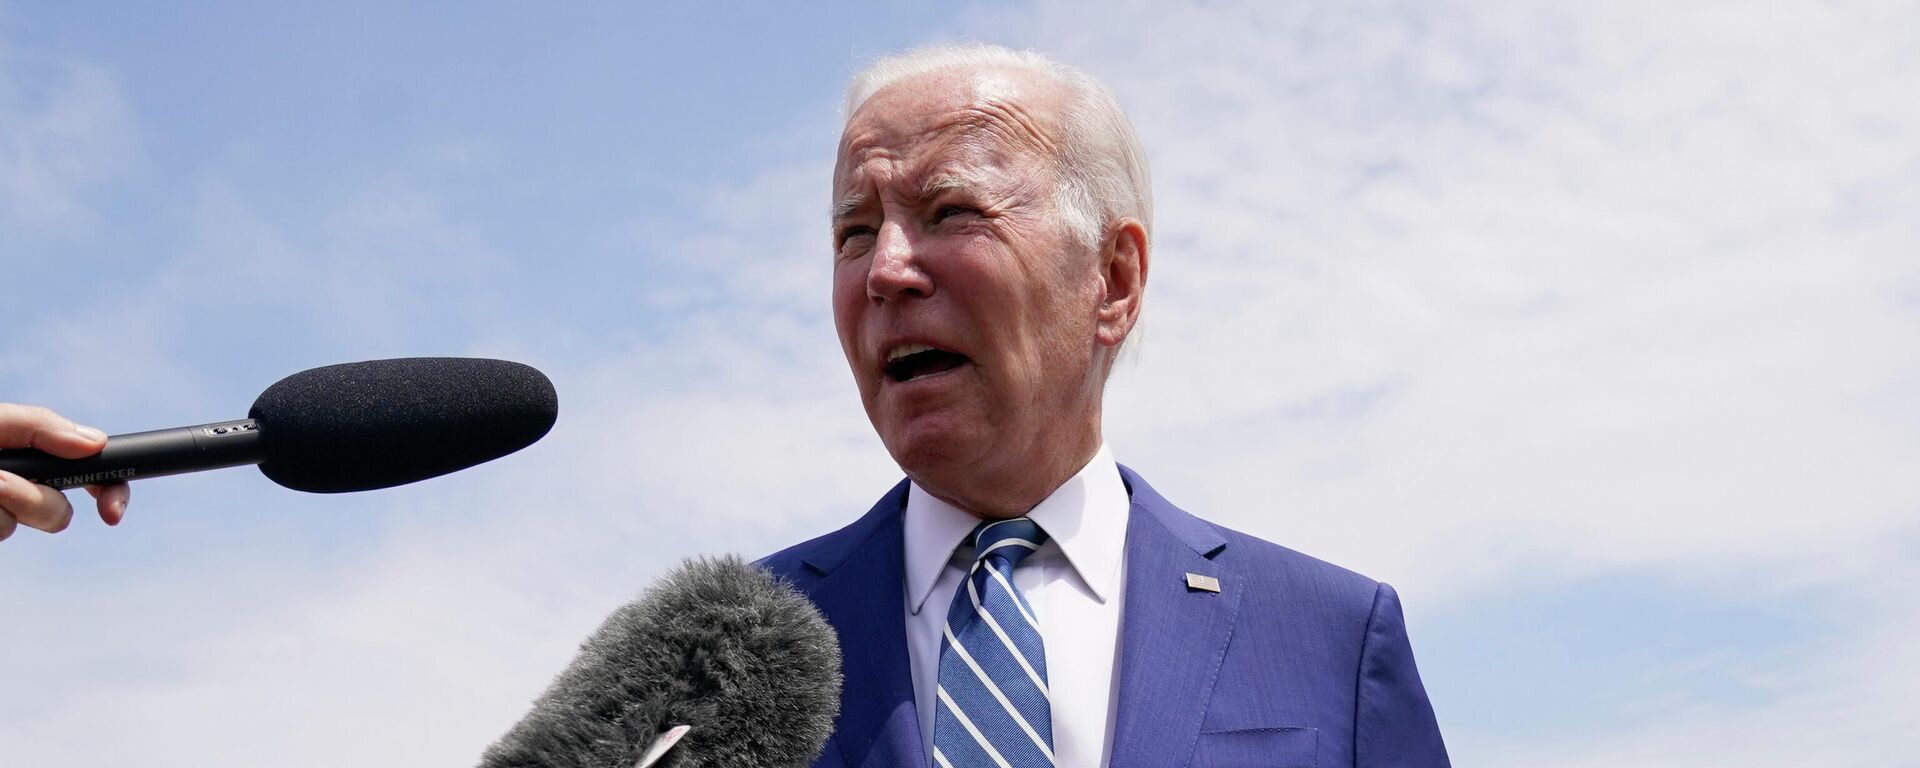 President Joe Biden speaks to reporters before he boards Air Force One for a trip to Los Angeles to attend the Summit of the Americas, Wednesday, June 8, 2022, at Andrews Air Force Base, Md. - Sputnik International, 1920, 22.06.2022